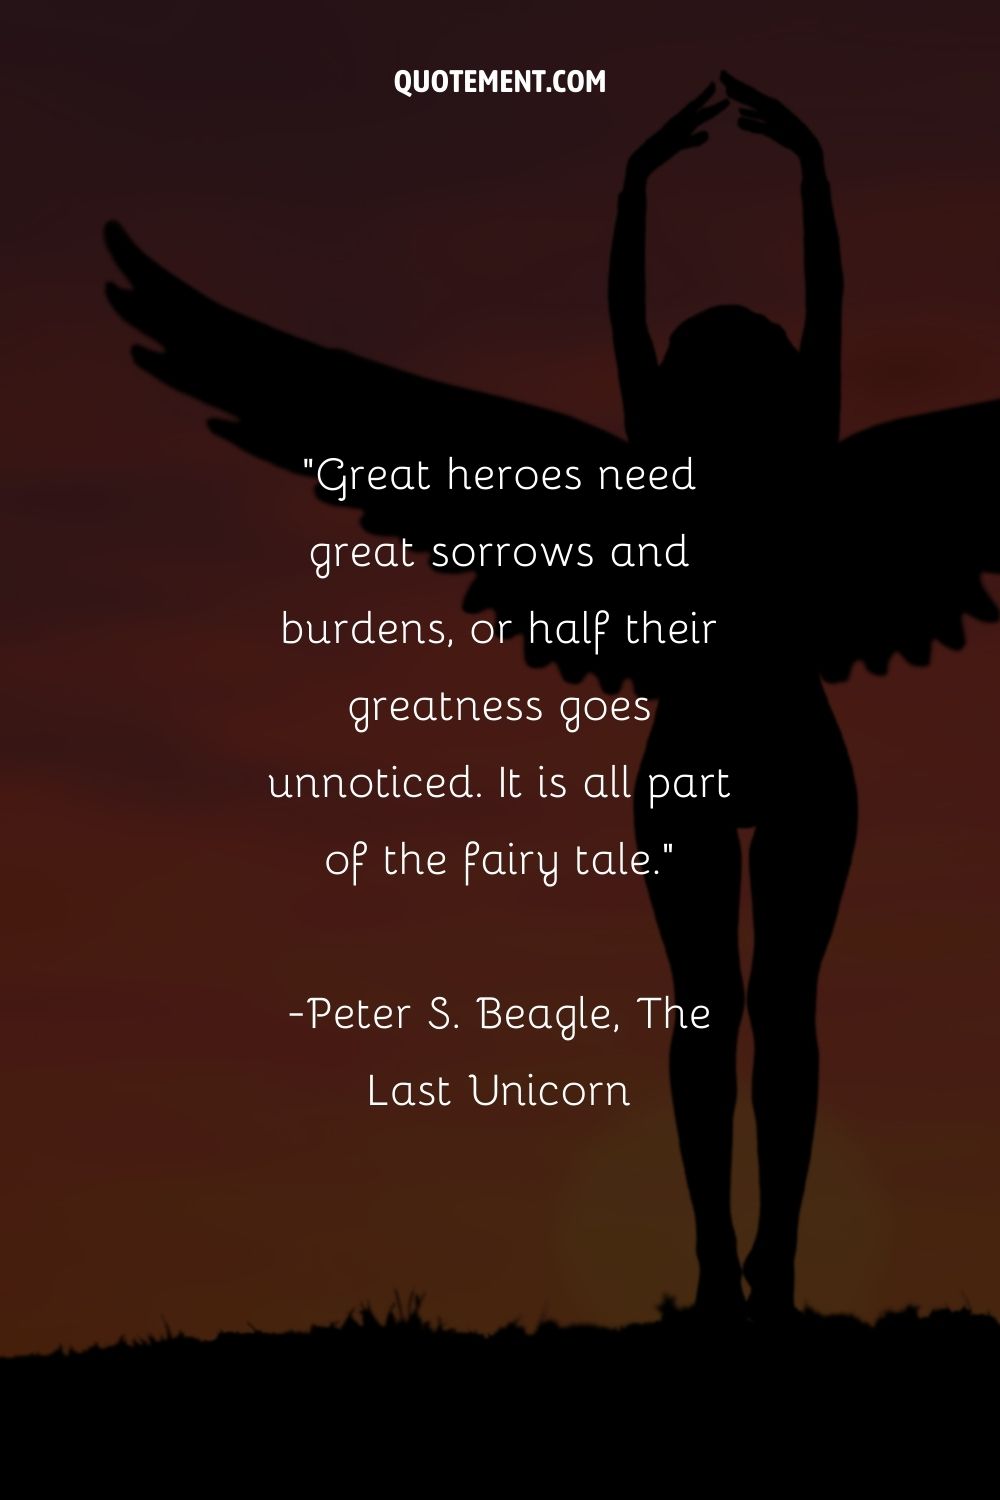 Great heroes need great sorrows and burdens, or half their greatness goes unnoticed.